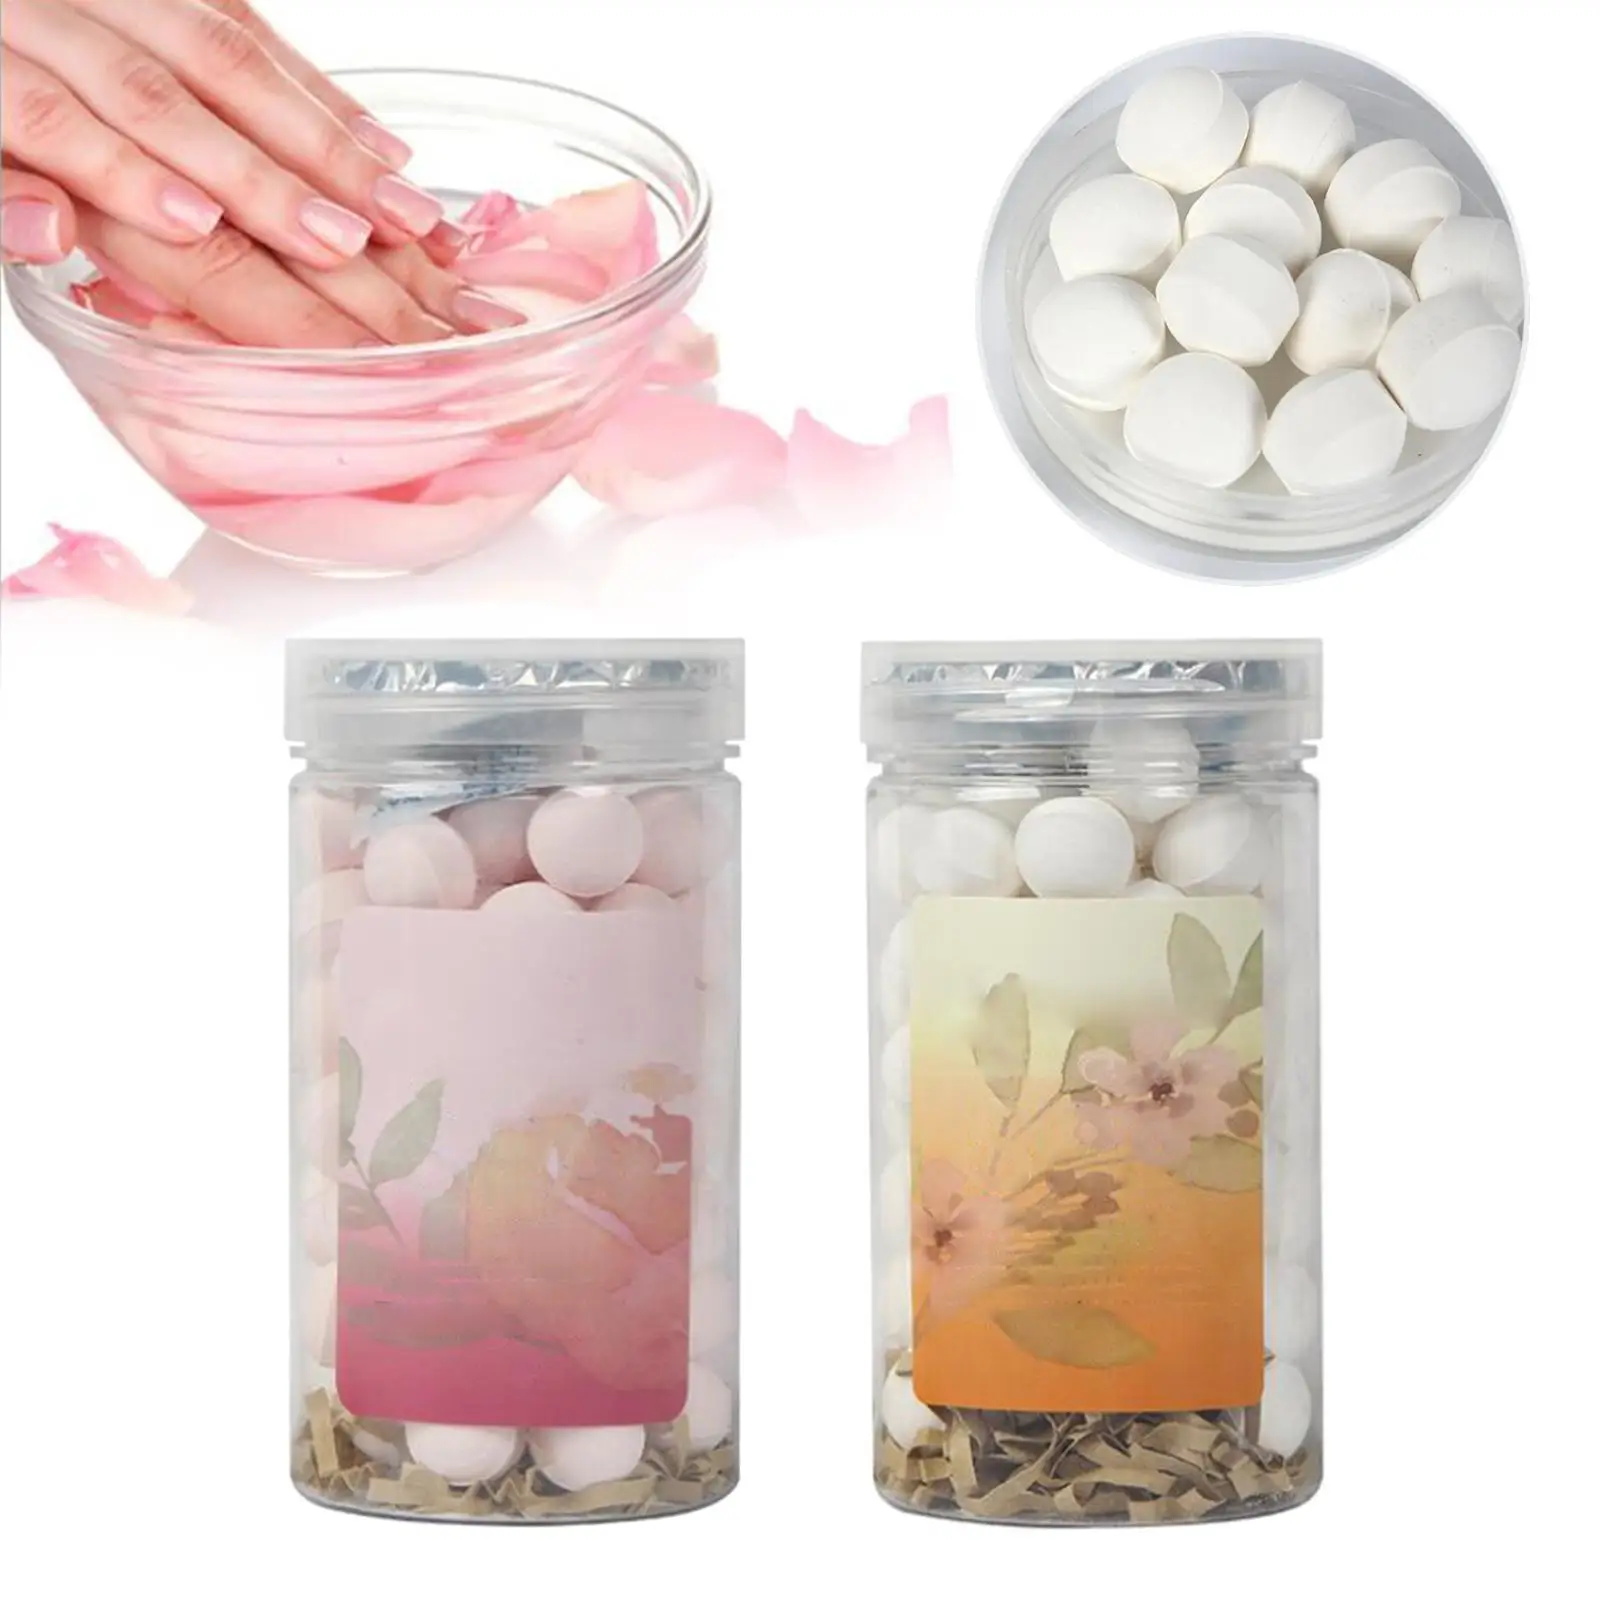 80 Pieces Effervescent Tablets Tool for Softening Skin Accessory